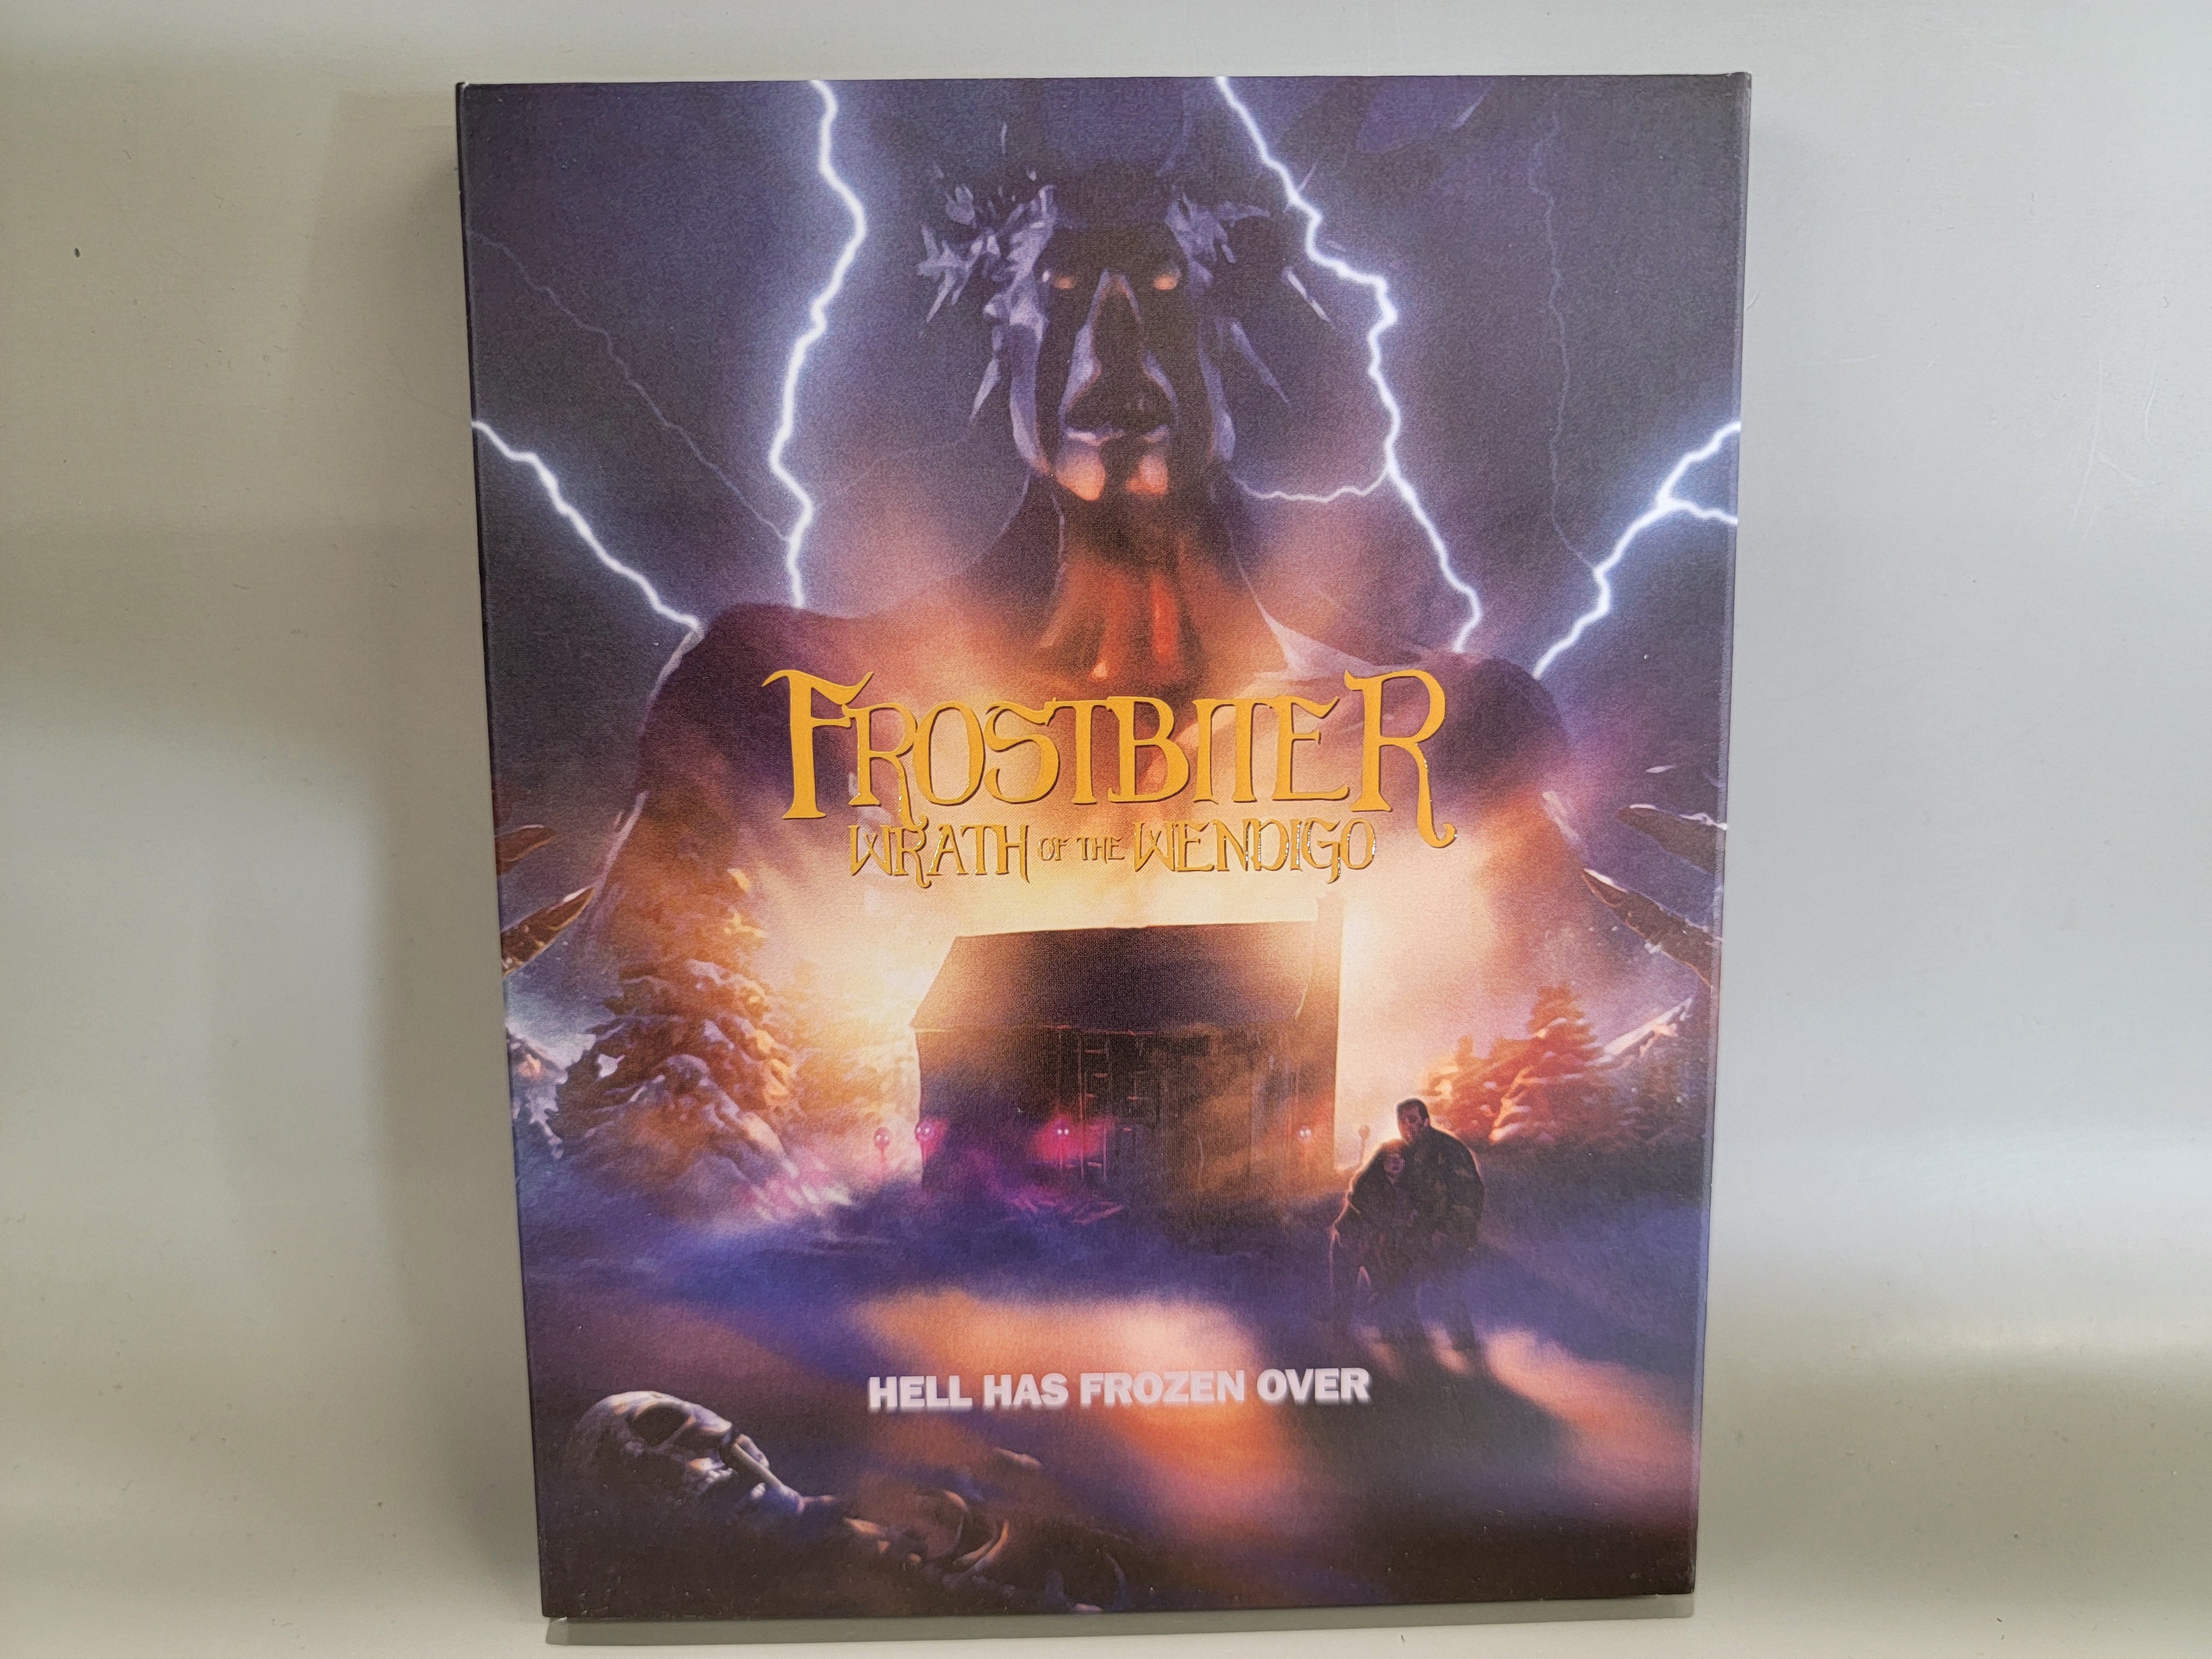 FROSTBITER (LIMITED EDITION) BLU-RAY [USED]